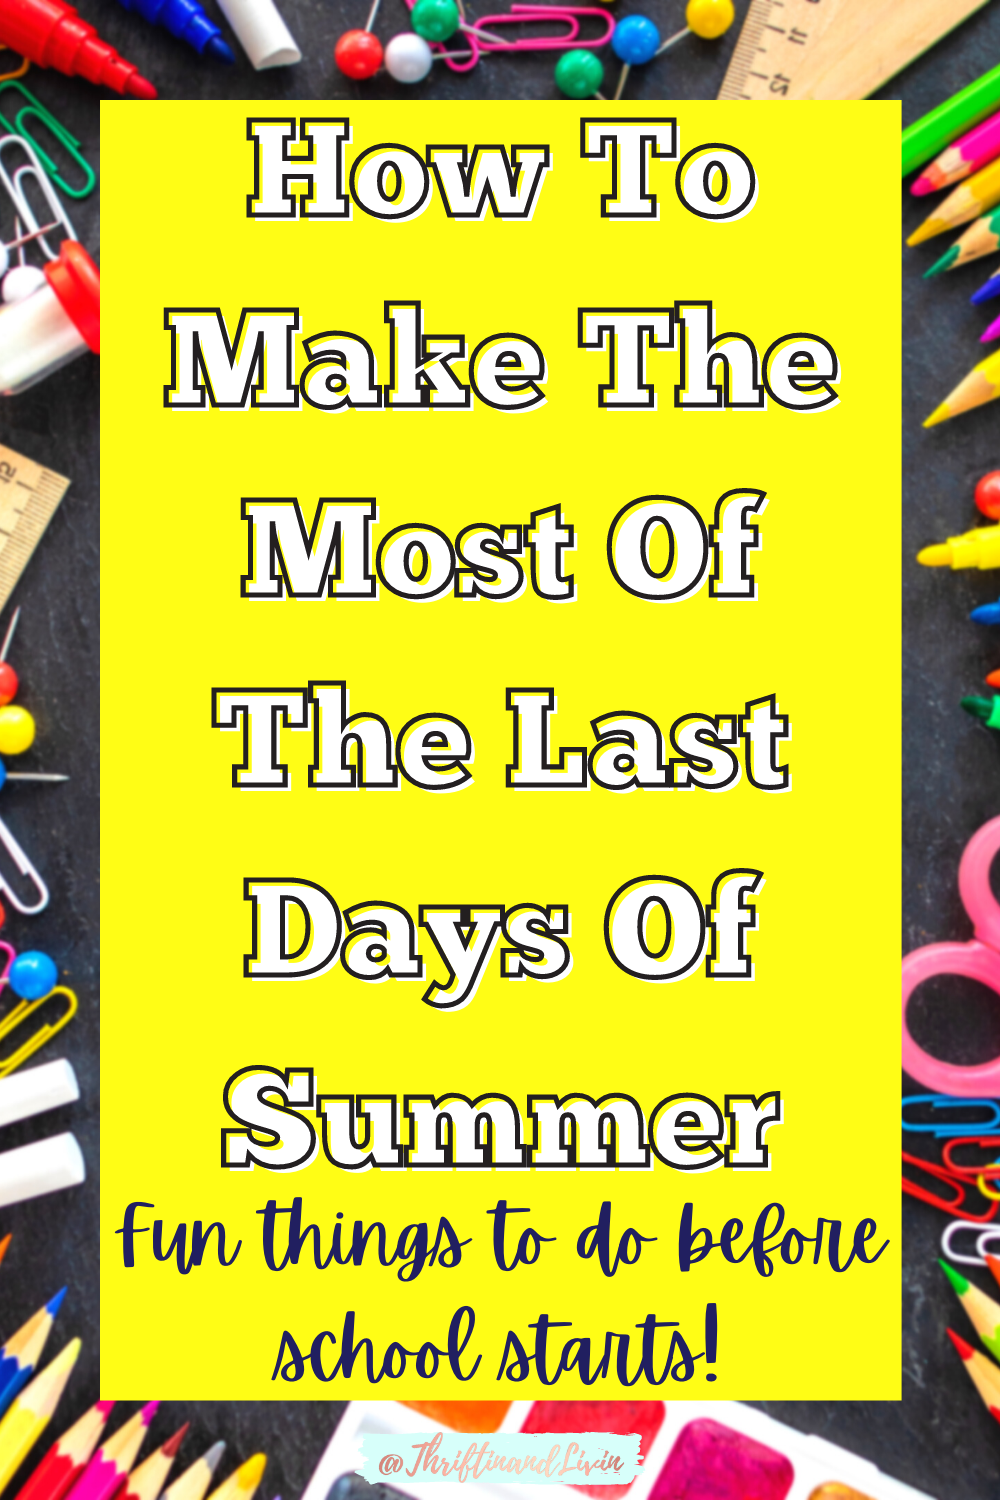 How To Make The Most of The Last Days of Summer - Fun Things To Do Before School Starts - Yellow Pinterest Pin Image